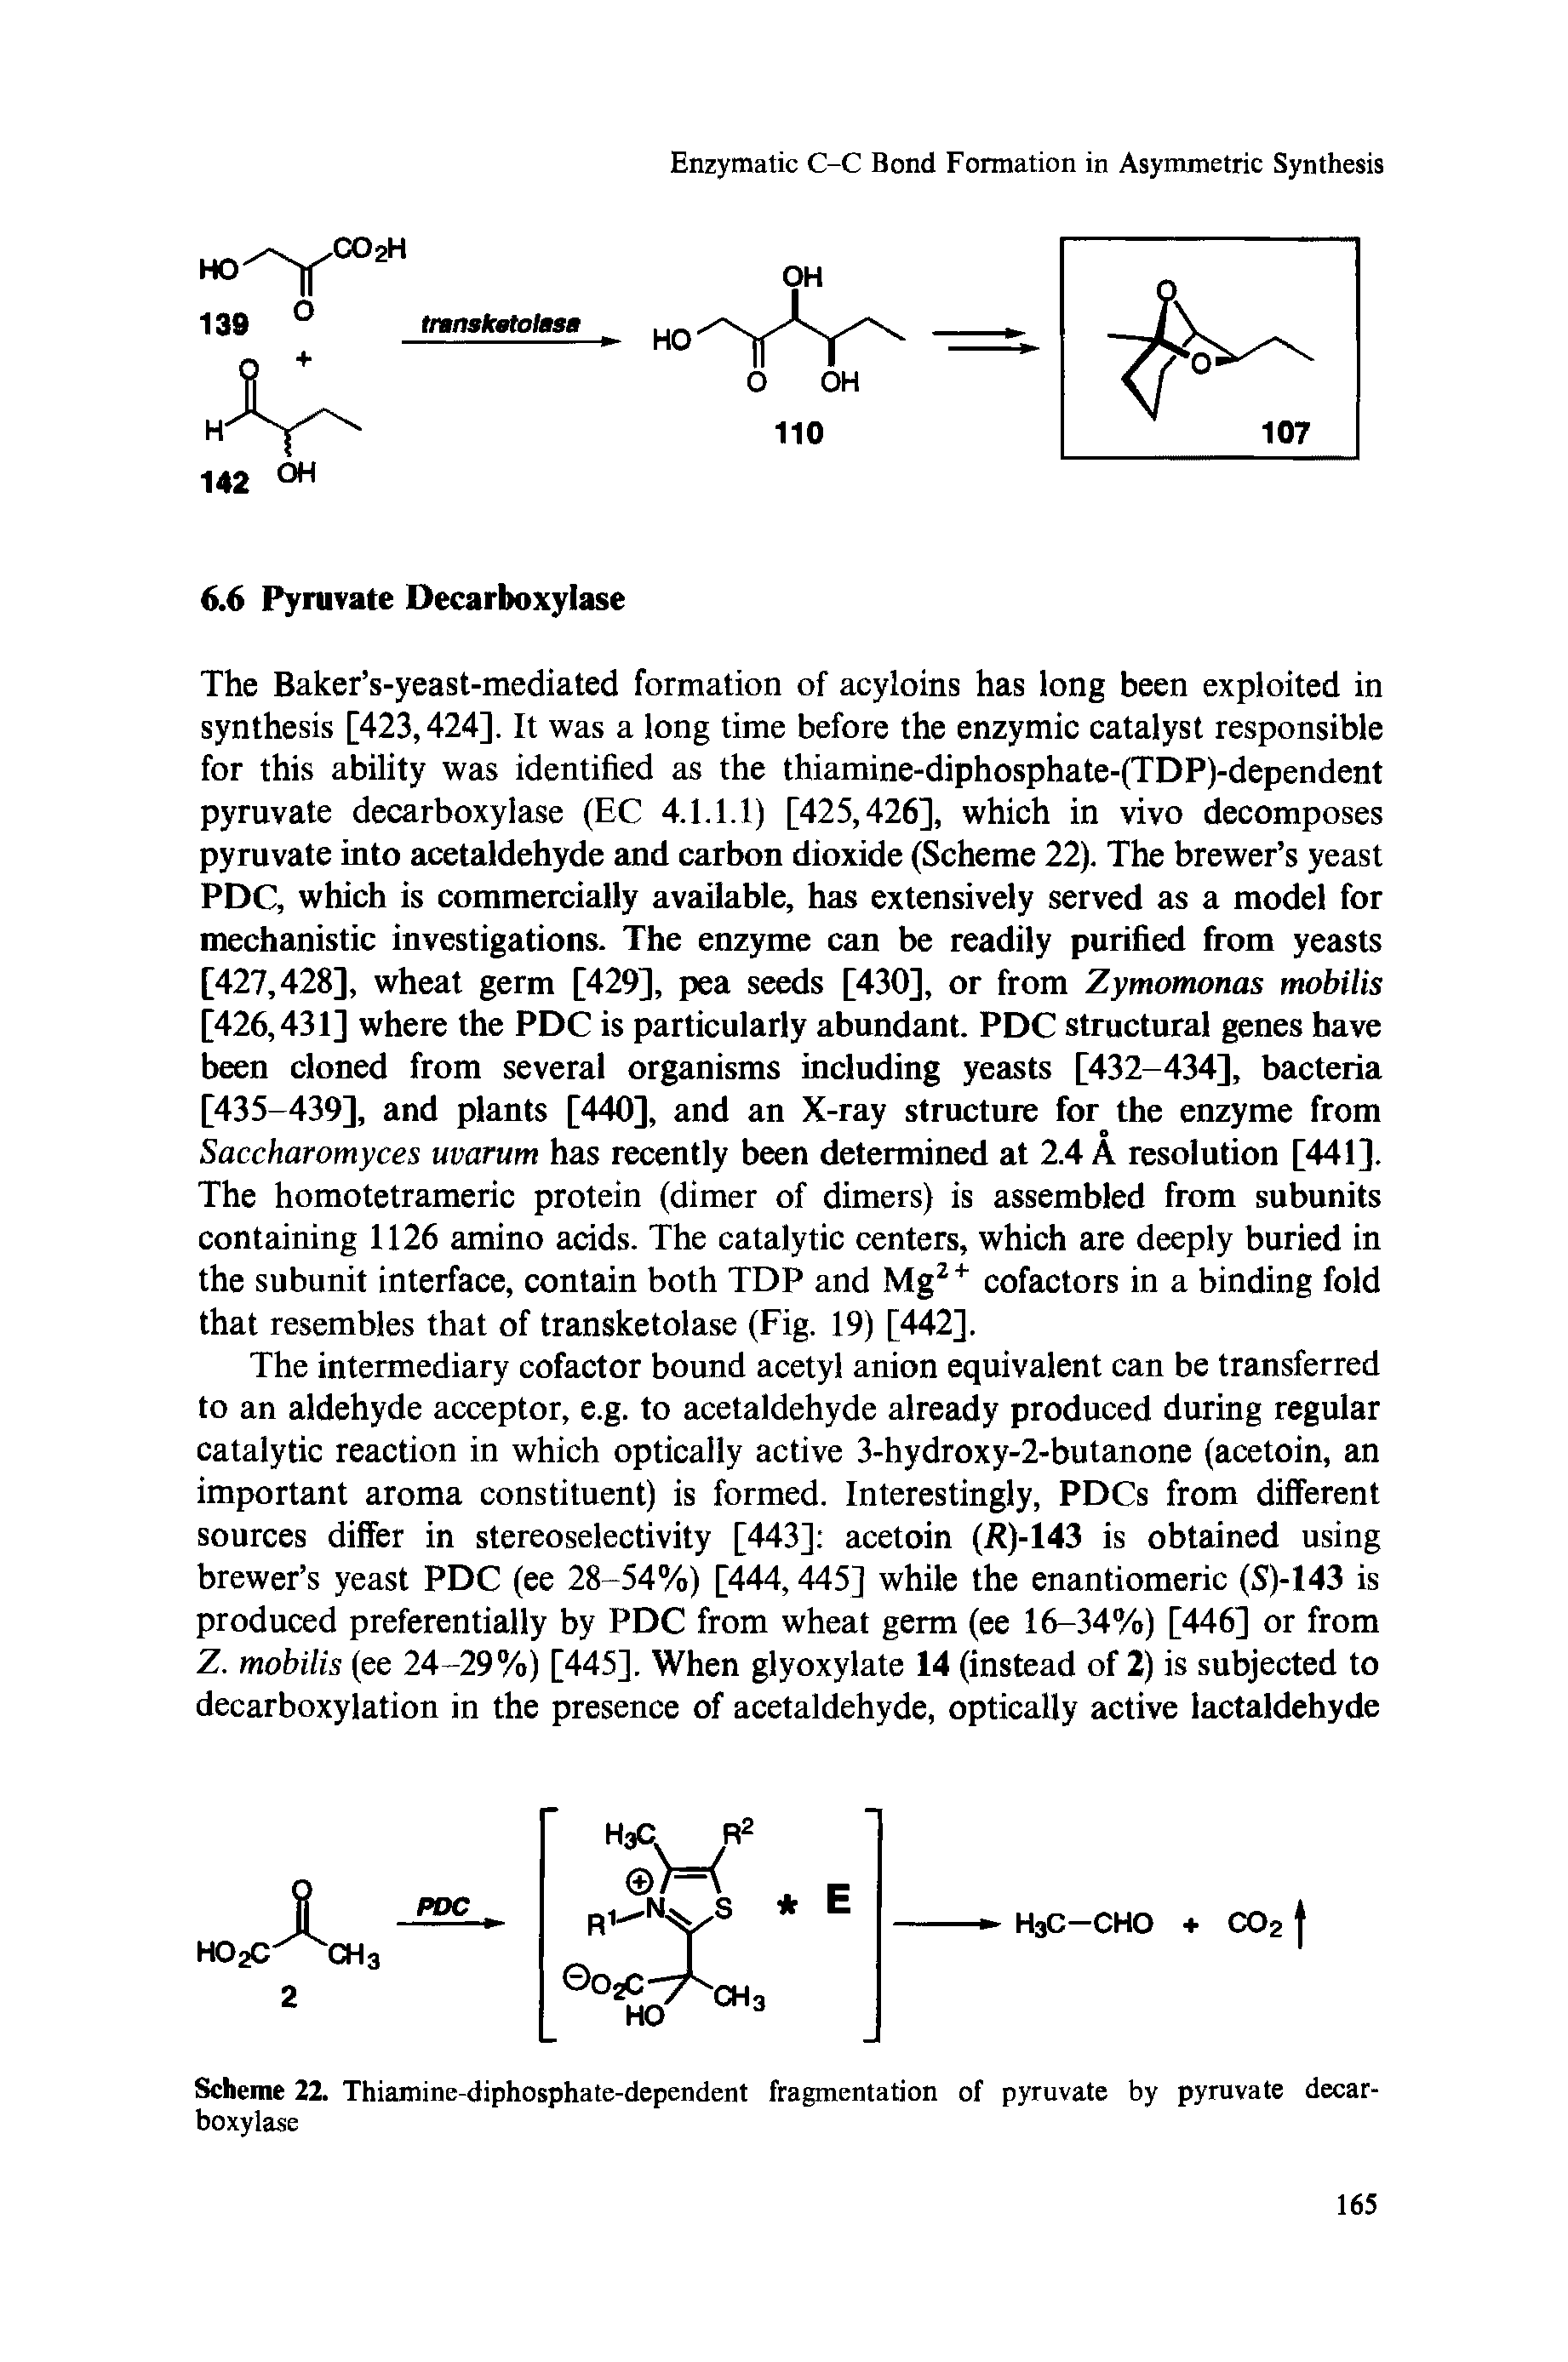 Scheme 22. Thiamine-diphosphate-dependent fragmentation of pyruvate by pyruvate decarboxylase...